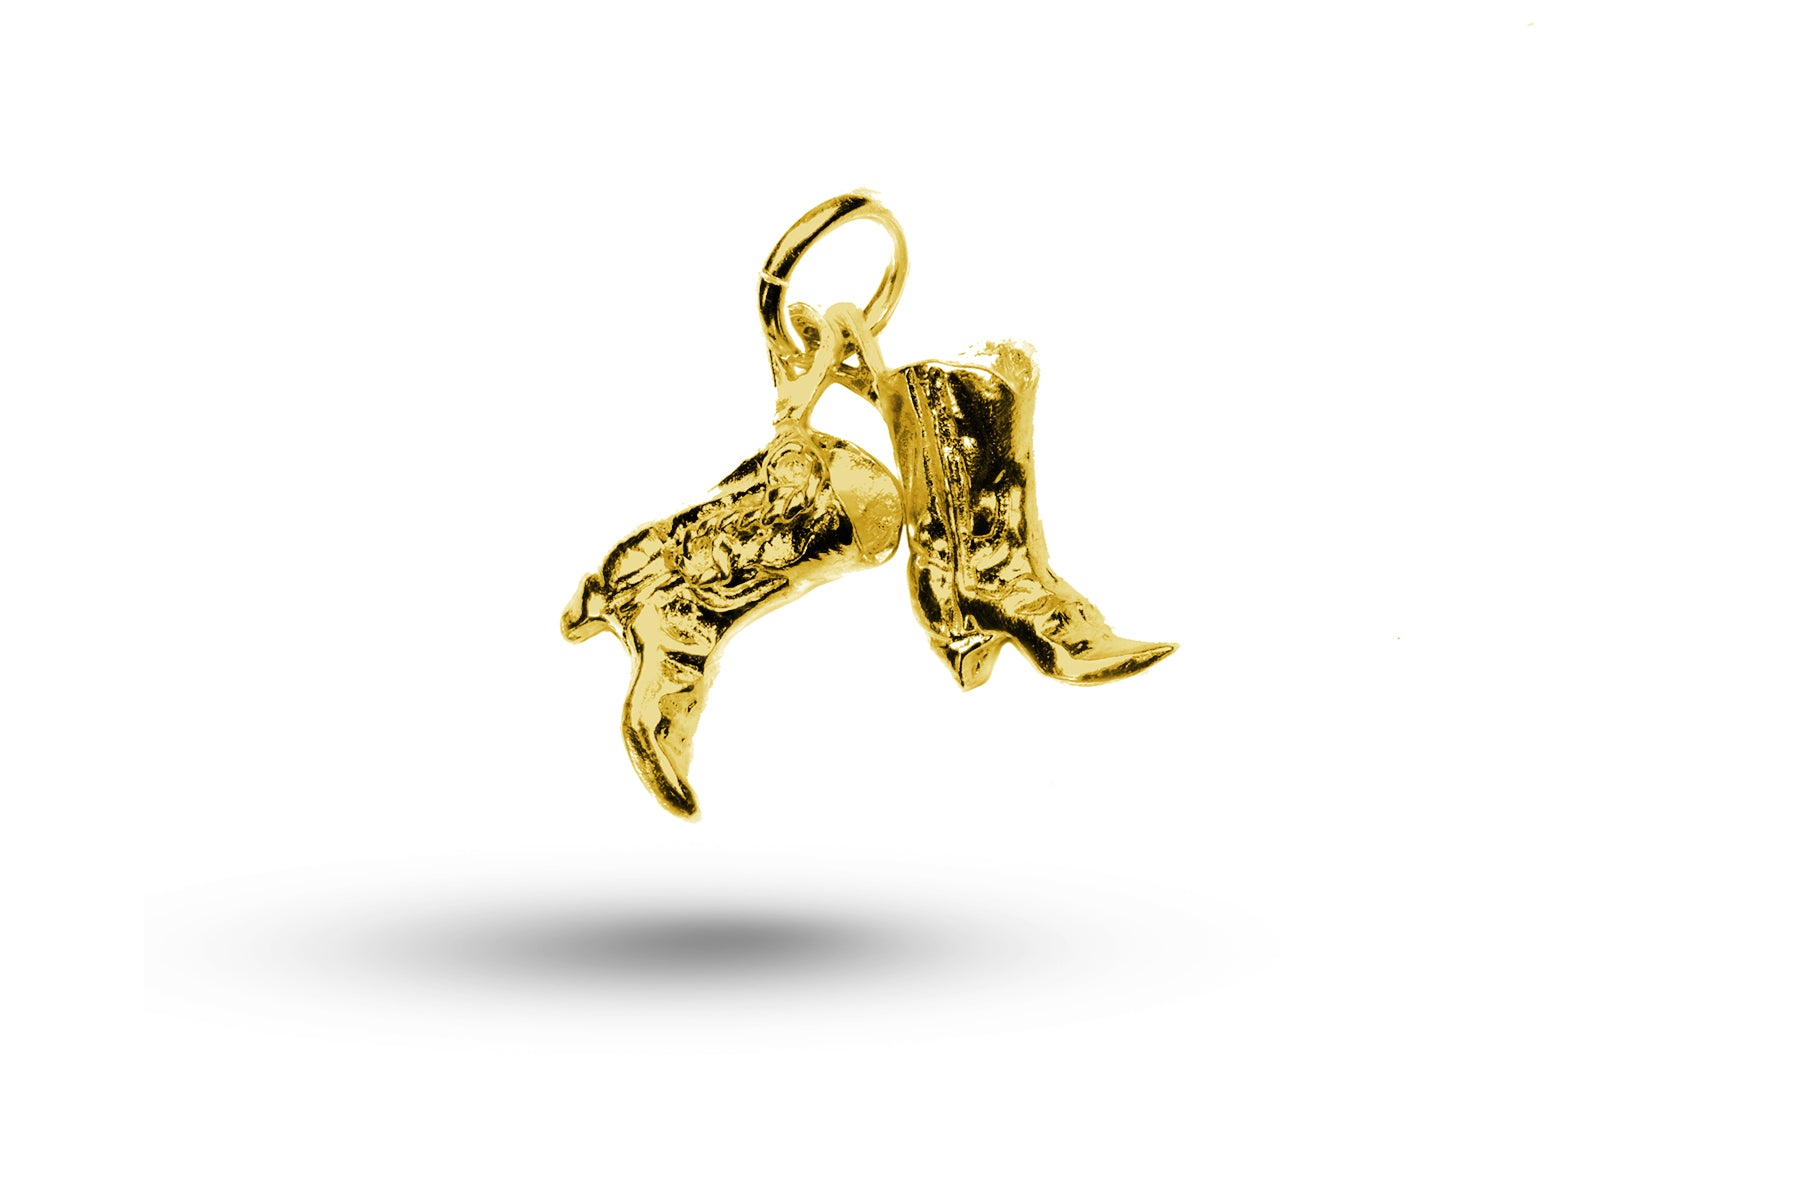 Yellow gold Cowboy Boots charm.